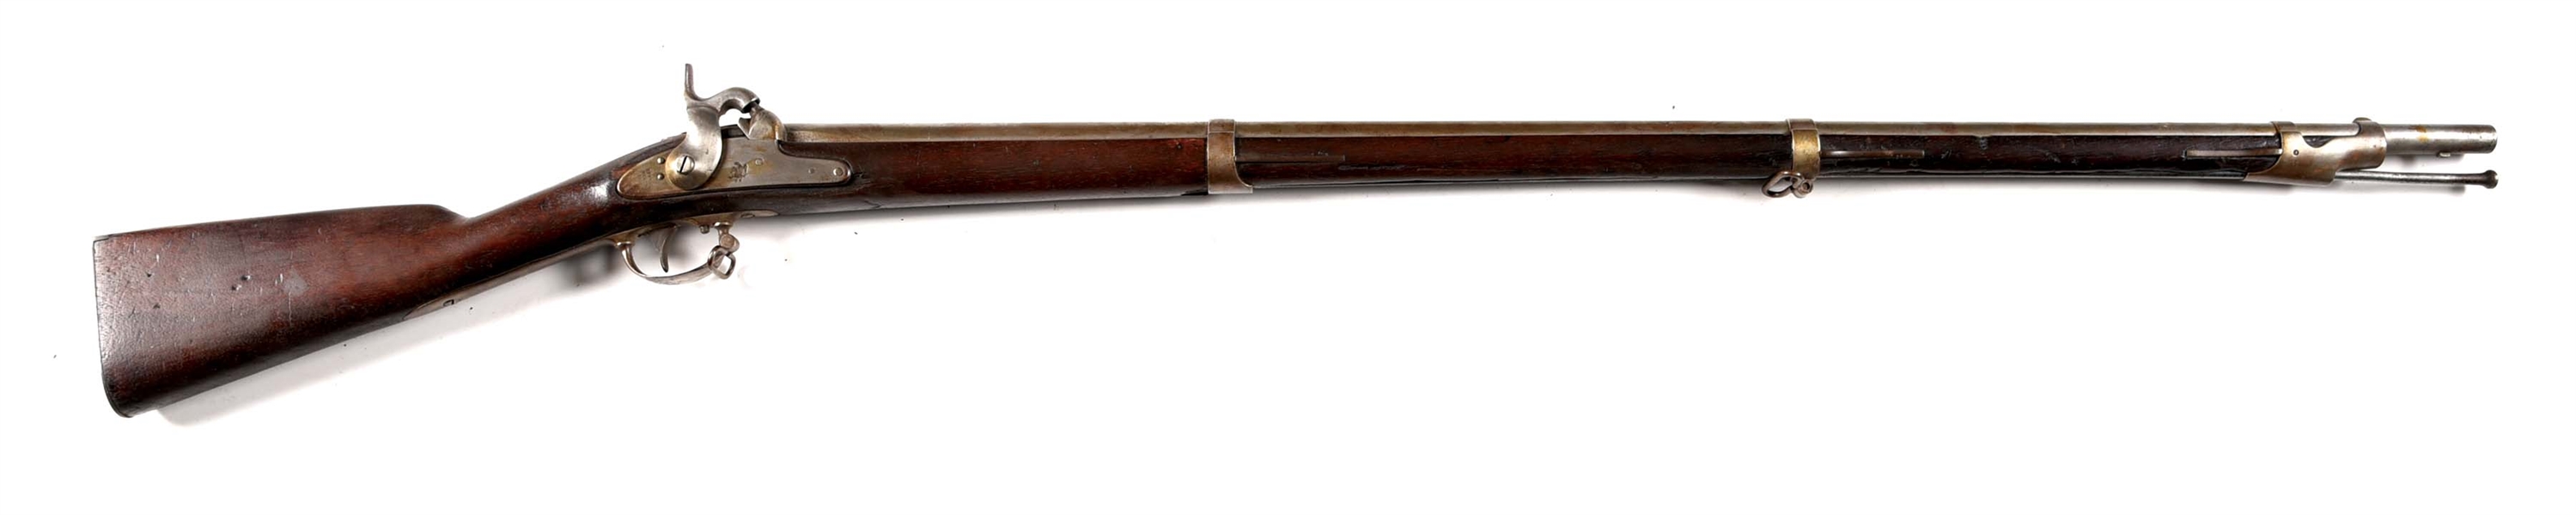 (A) SPRINGFIELD 1851 PERCUSSION CADET MUSKET.